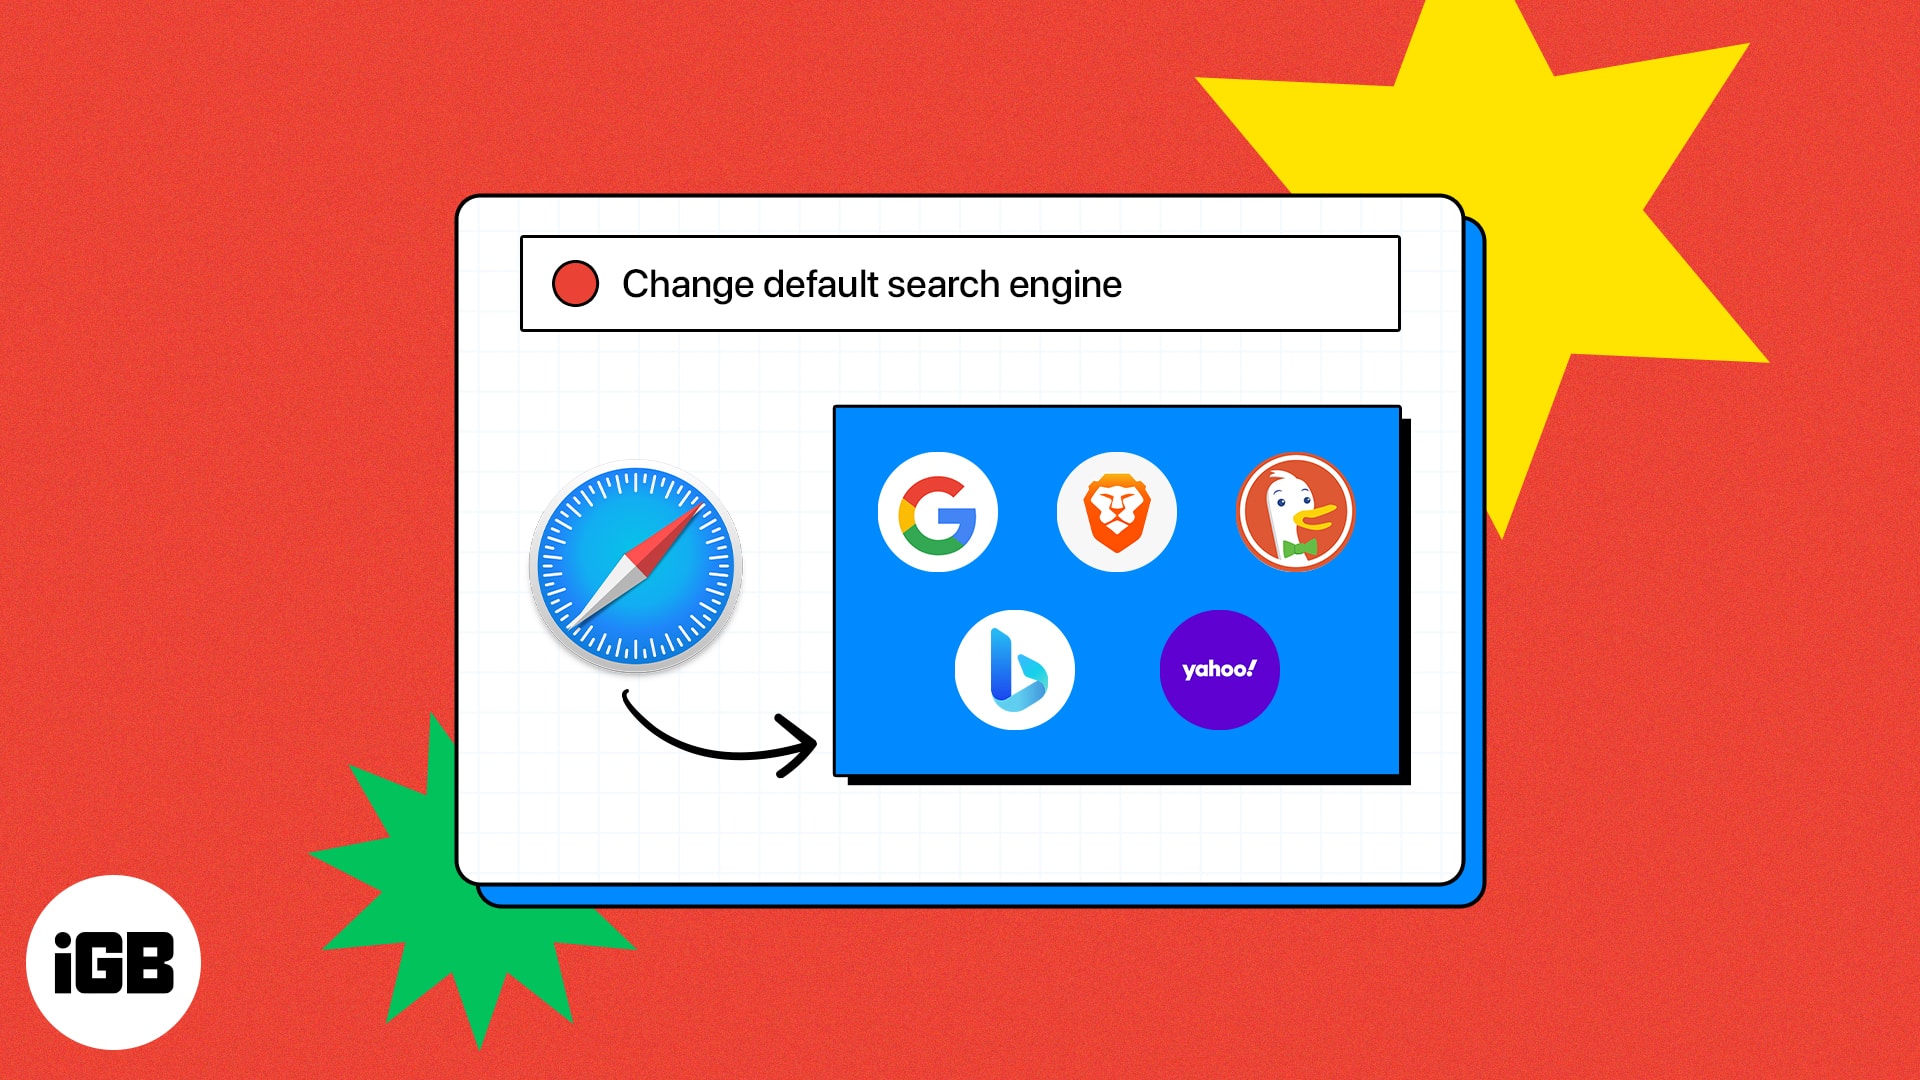 How to change the default search engine in Safari on iPhone, iPad and Mac